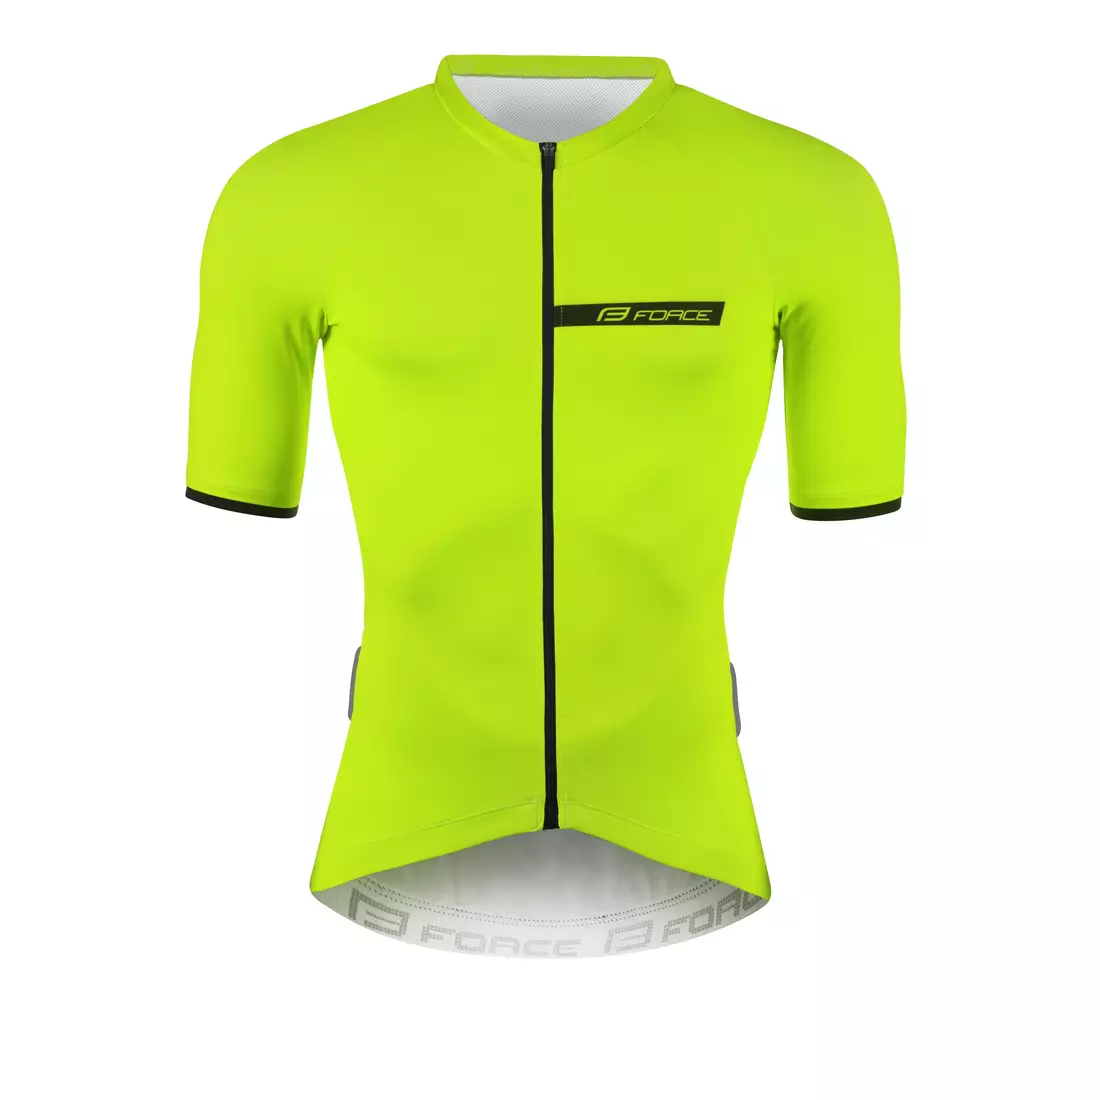 FORCE Men's cycling jersey CHARM, fluo 9001190